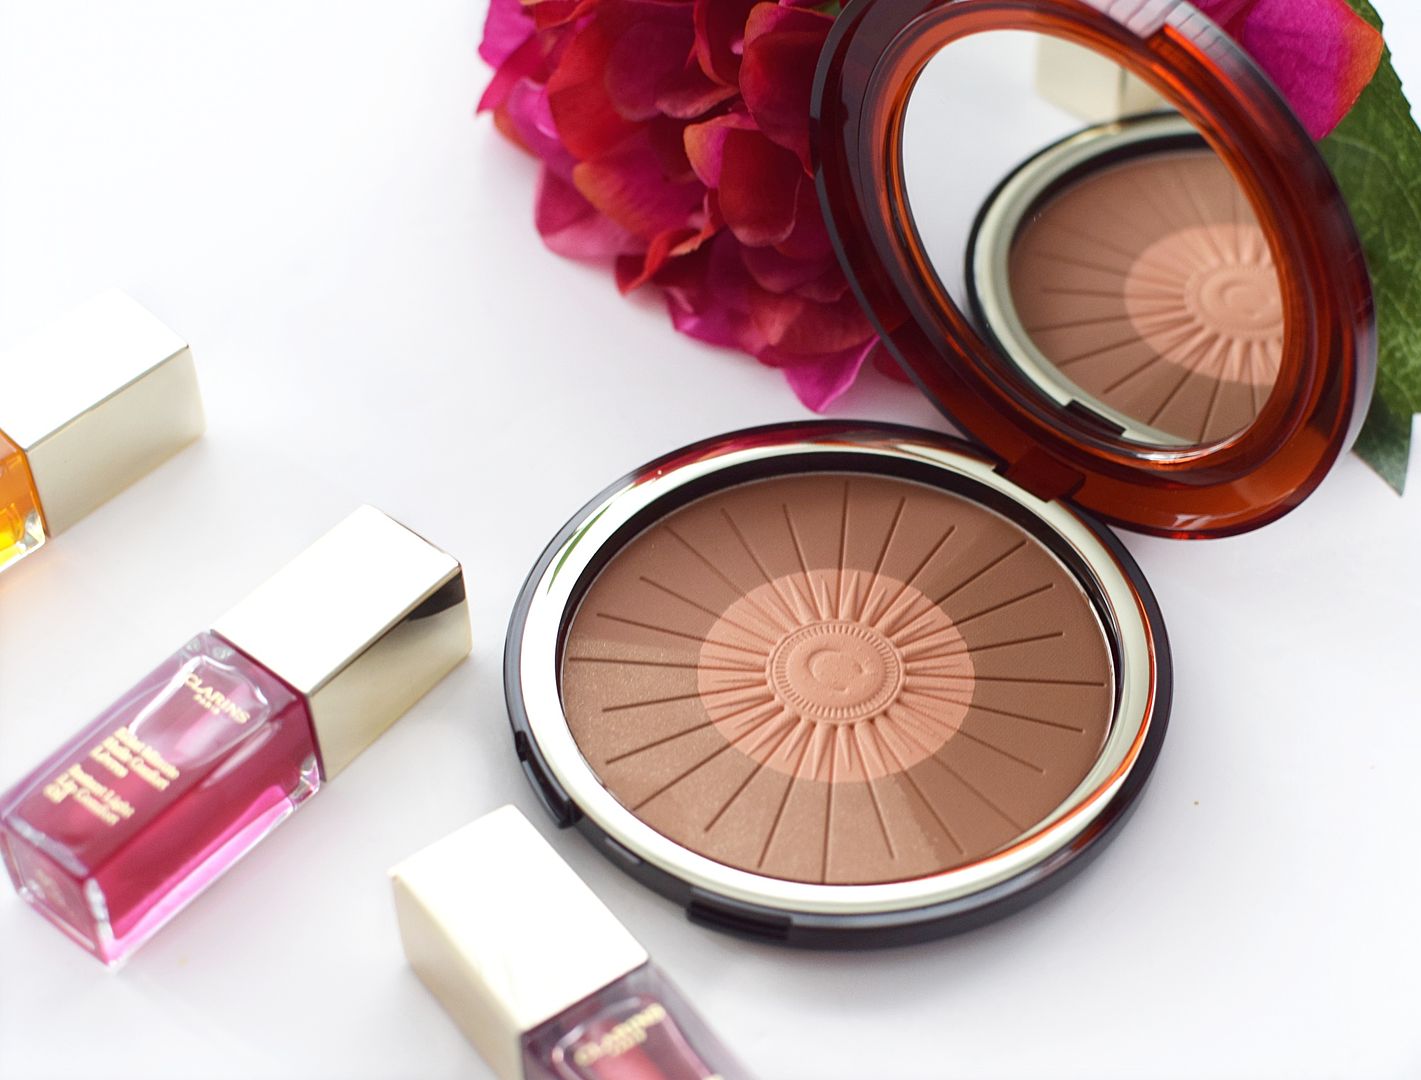 Clarins Bronzing & Blush Compact Summer 2016 Review